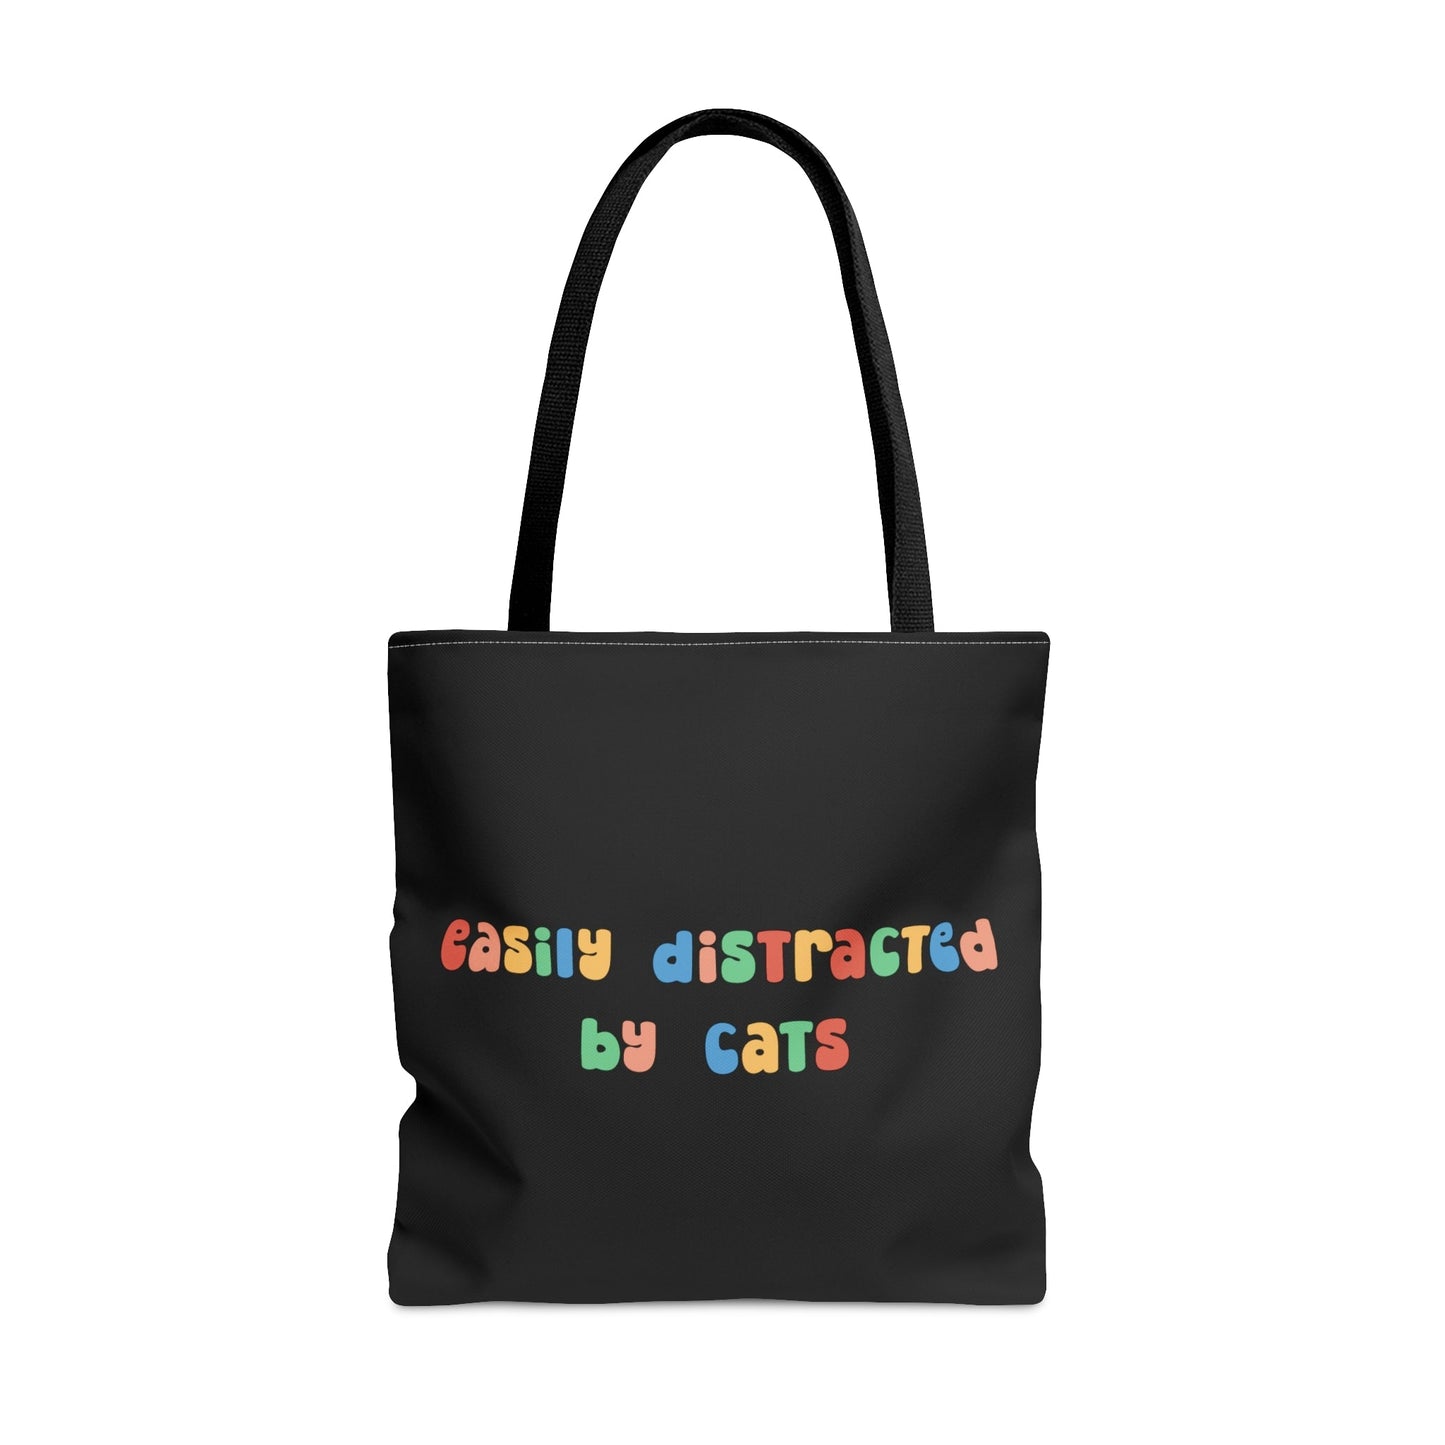 Easily Distracted by Cats | Tote Bag - Detezi Designs-17556783200434149302